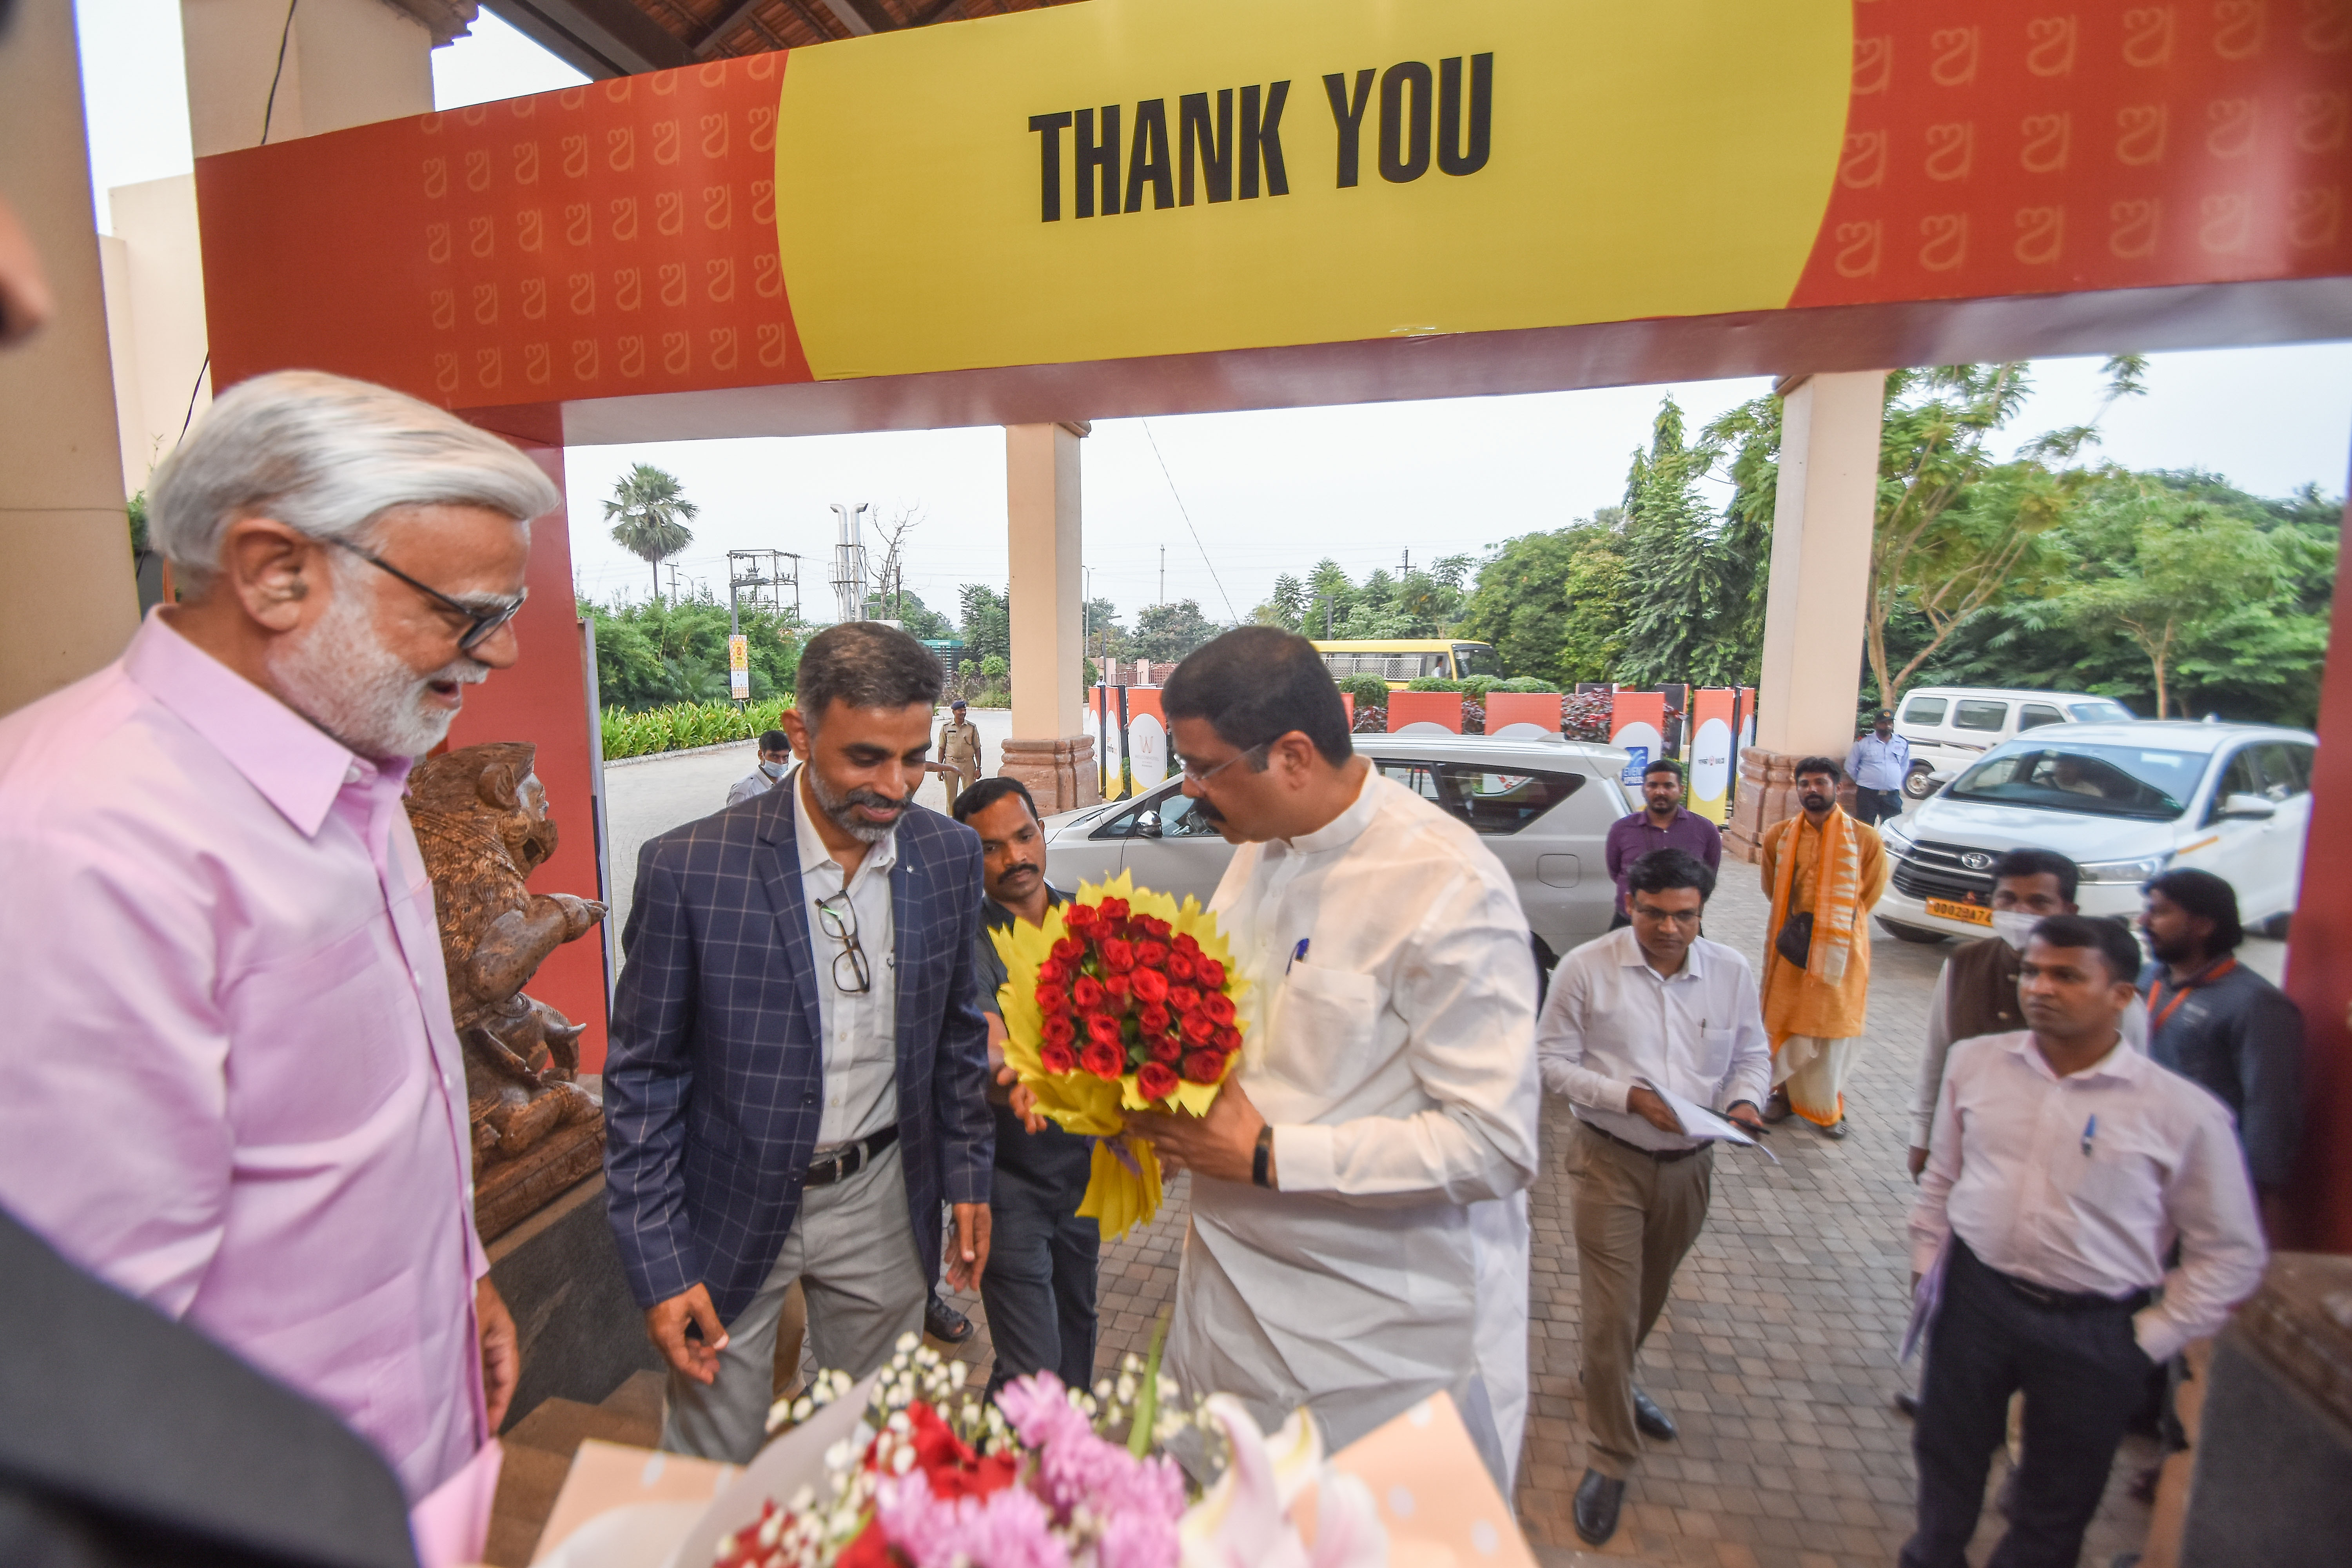 Union Minster Dharmendra Pradhan being welcome by TNIE Resident Editor Siba Mohanty and TNIE Editorial Director Pabhu Chawla on the first day Odisha Literay Festival in Bhubaneswar - Express / DEBADATTA MALLICK